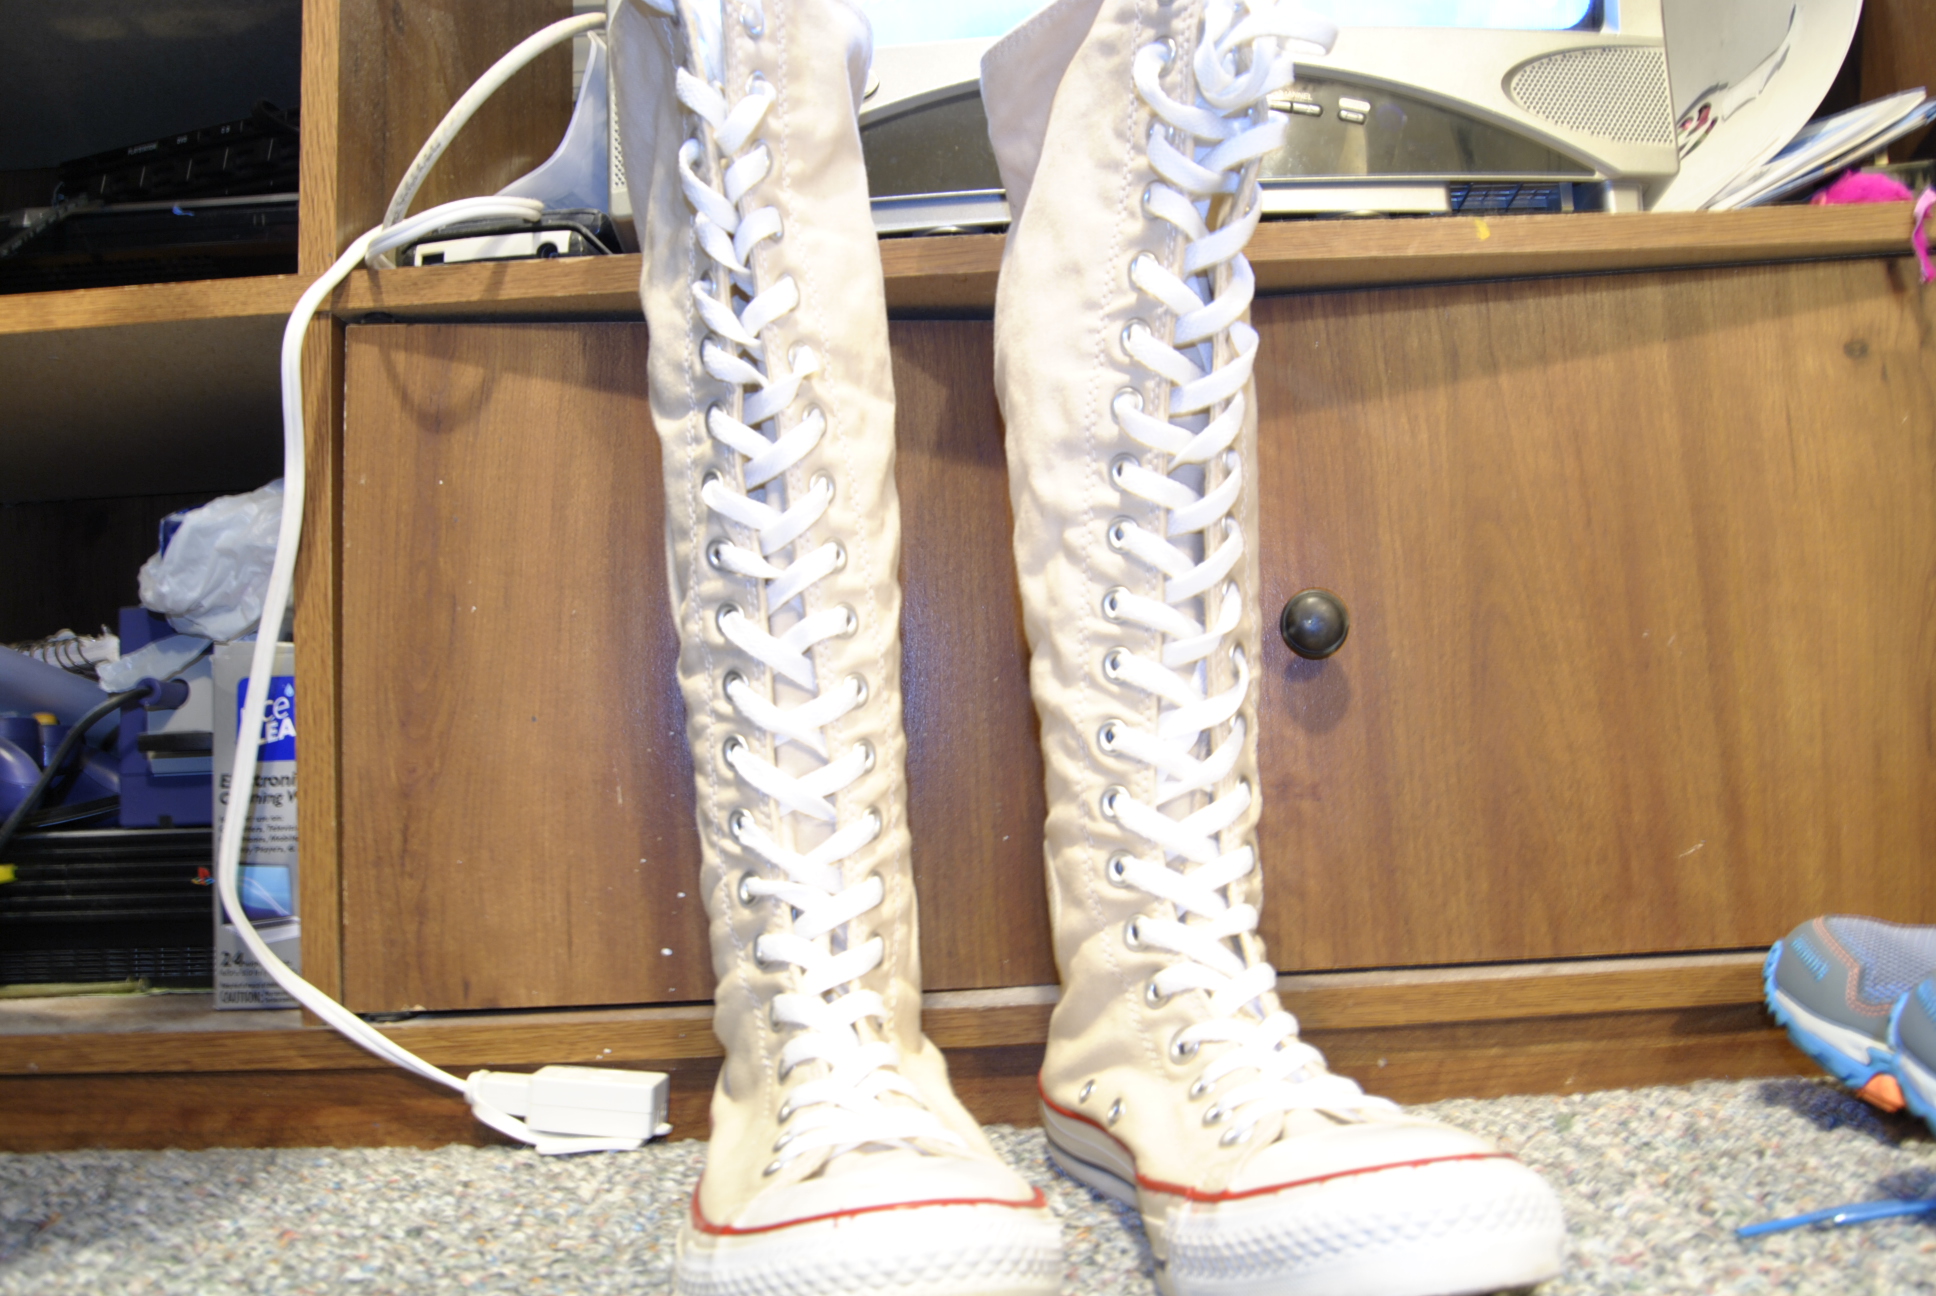 Slightly clearer photo of converse boots. I tea dye the shoes and painted  the black stripes red and blue. | RPF Costume and Prop Maker Community